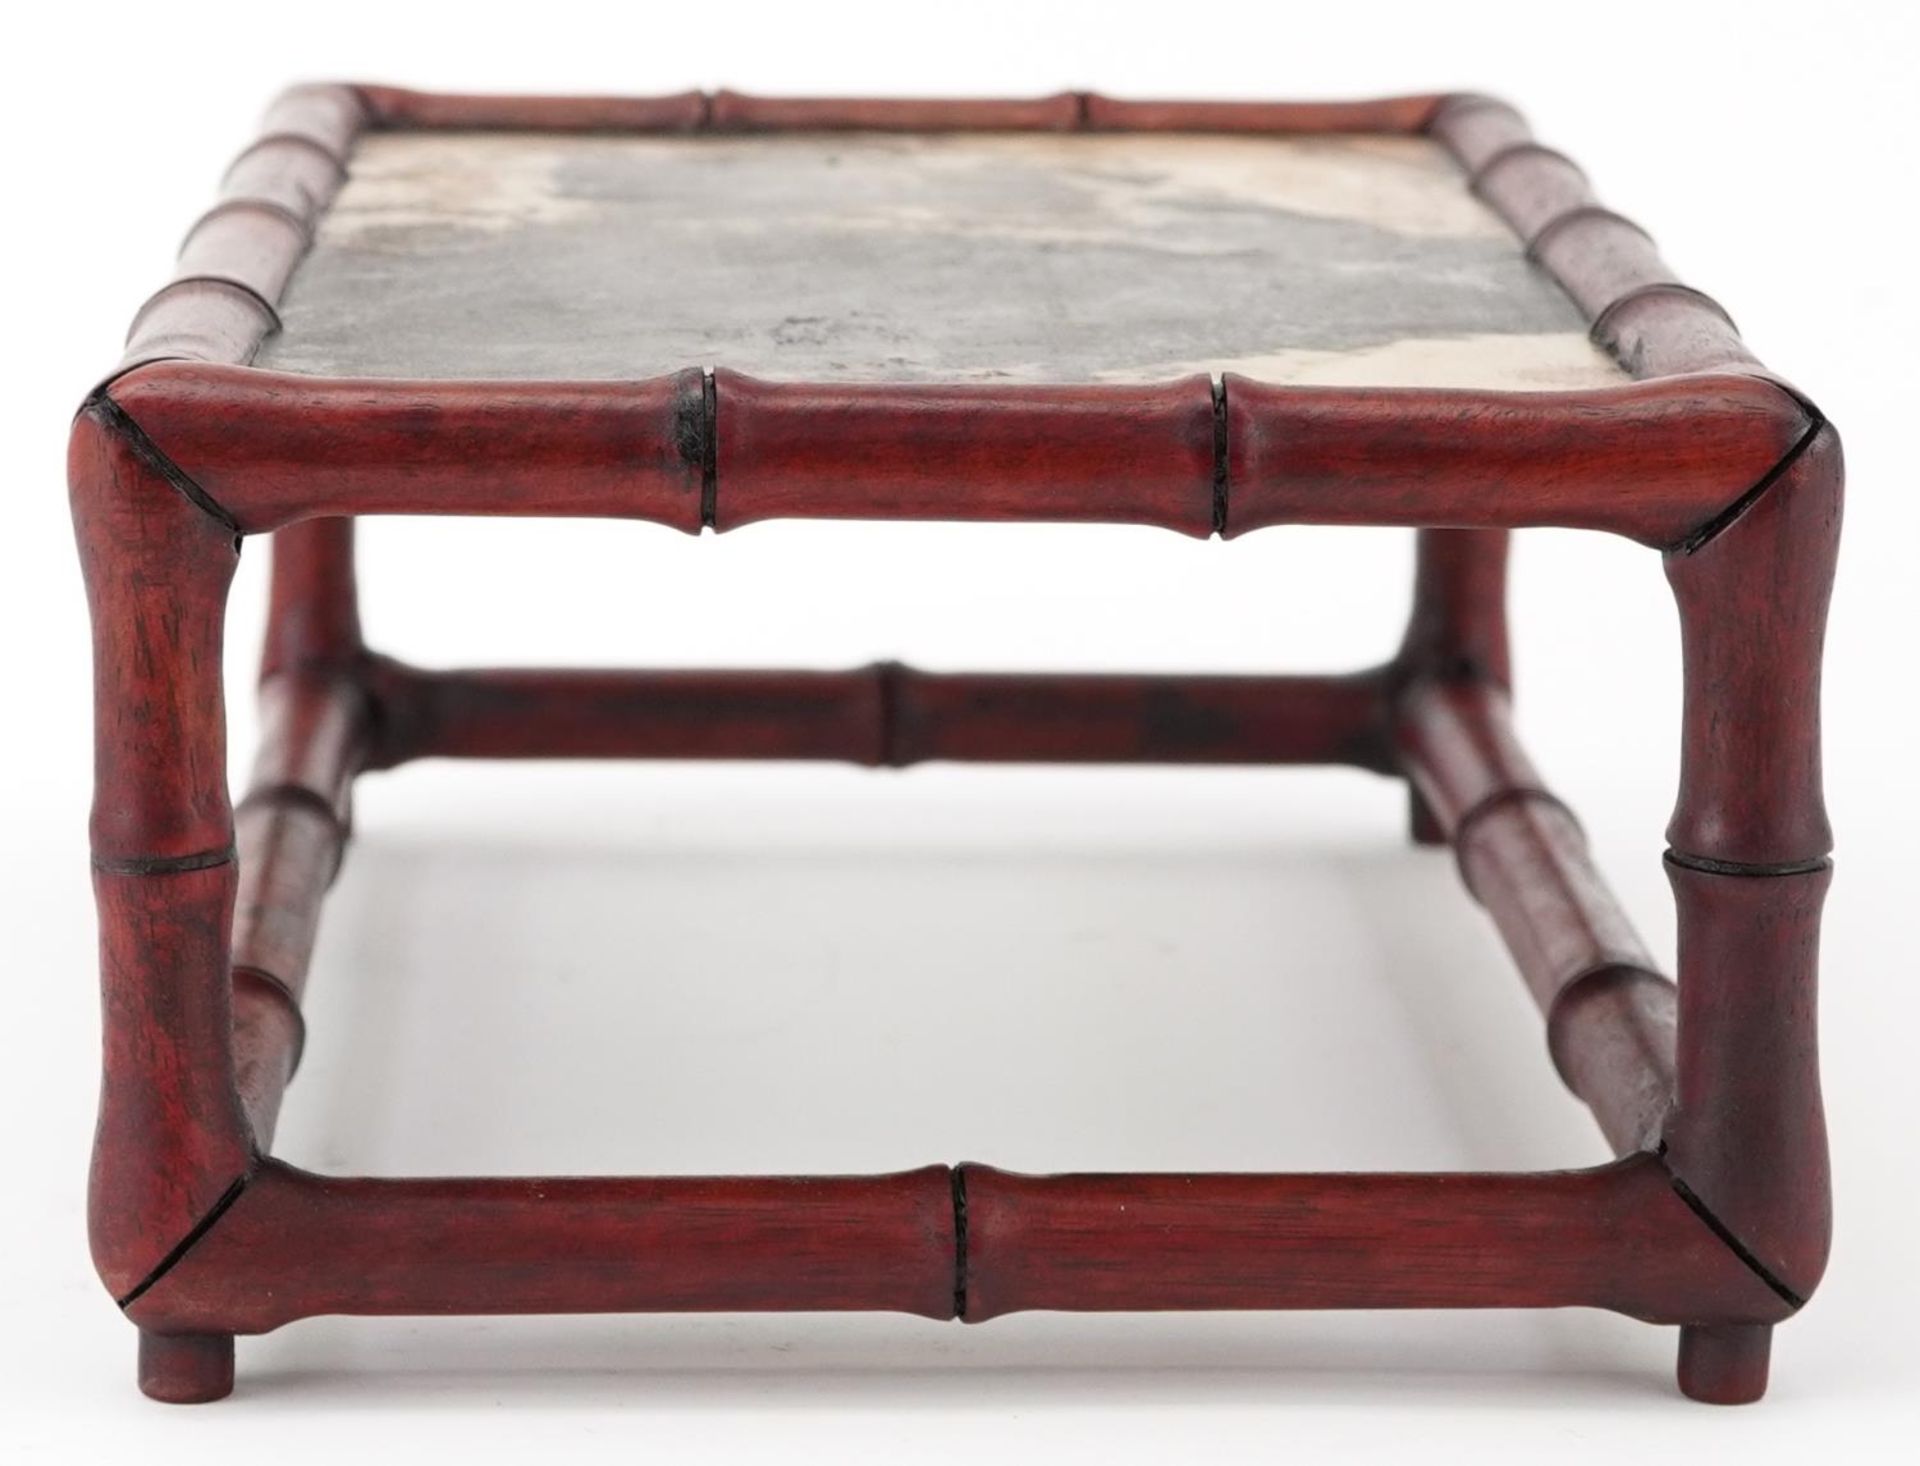 Chinese faux bamboo hardwood and hardstone stand, 10.5cm H x 29cm W x 17.5cm D - Bild 6 aus 7